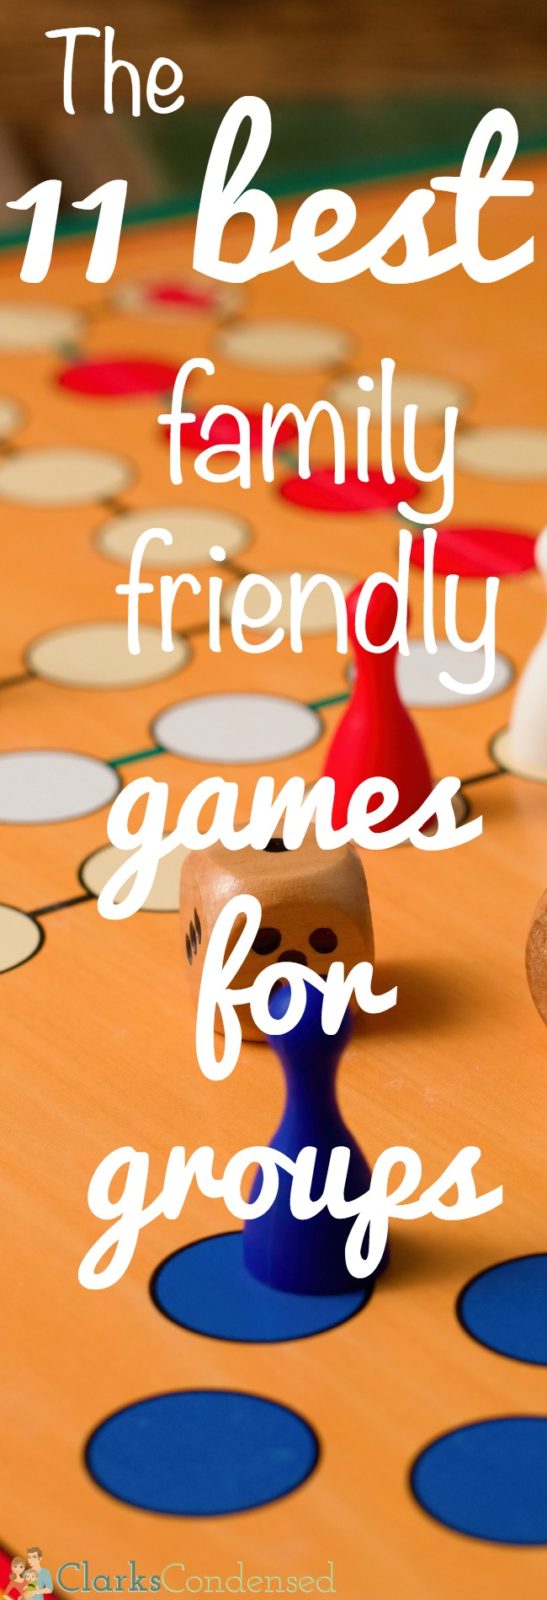 friendly games image